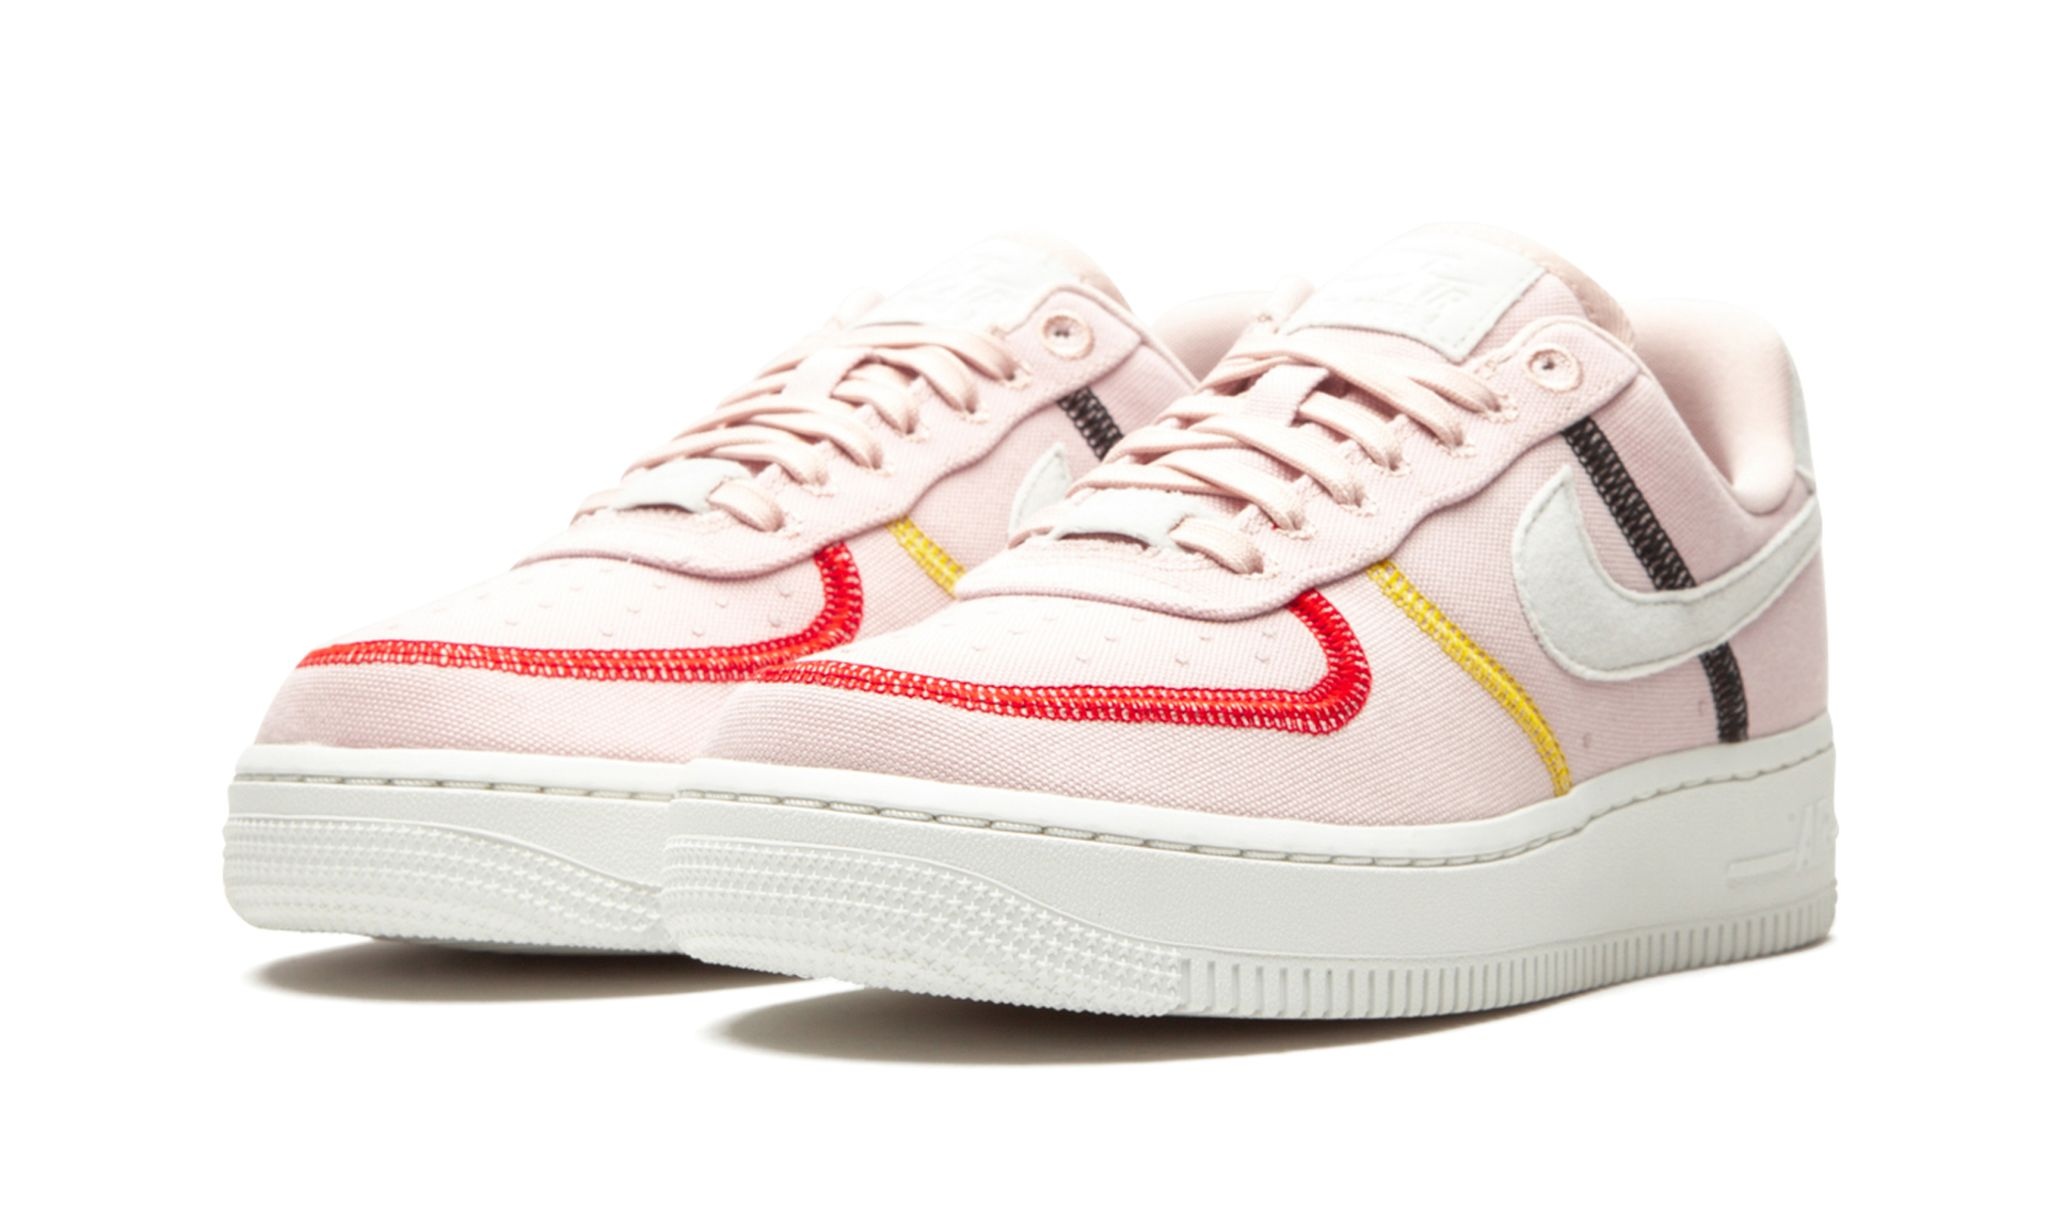 WMNS Air Force 1 "07 LX "Stitched Canvas - Silt Red" - 2